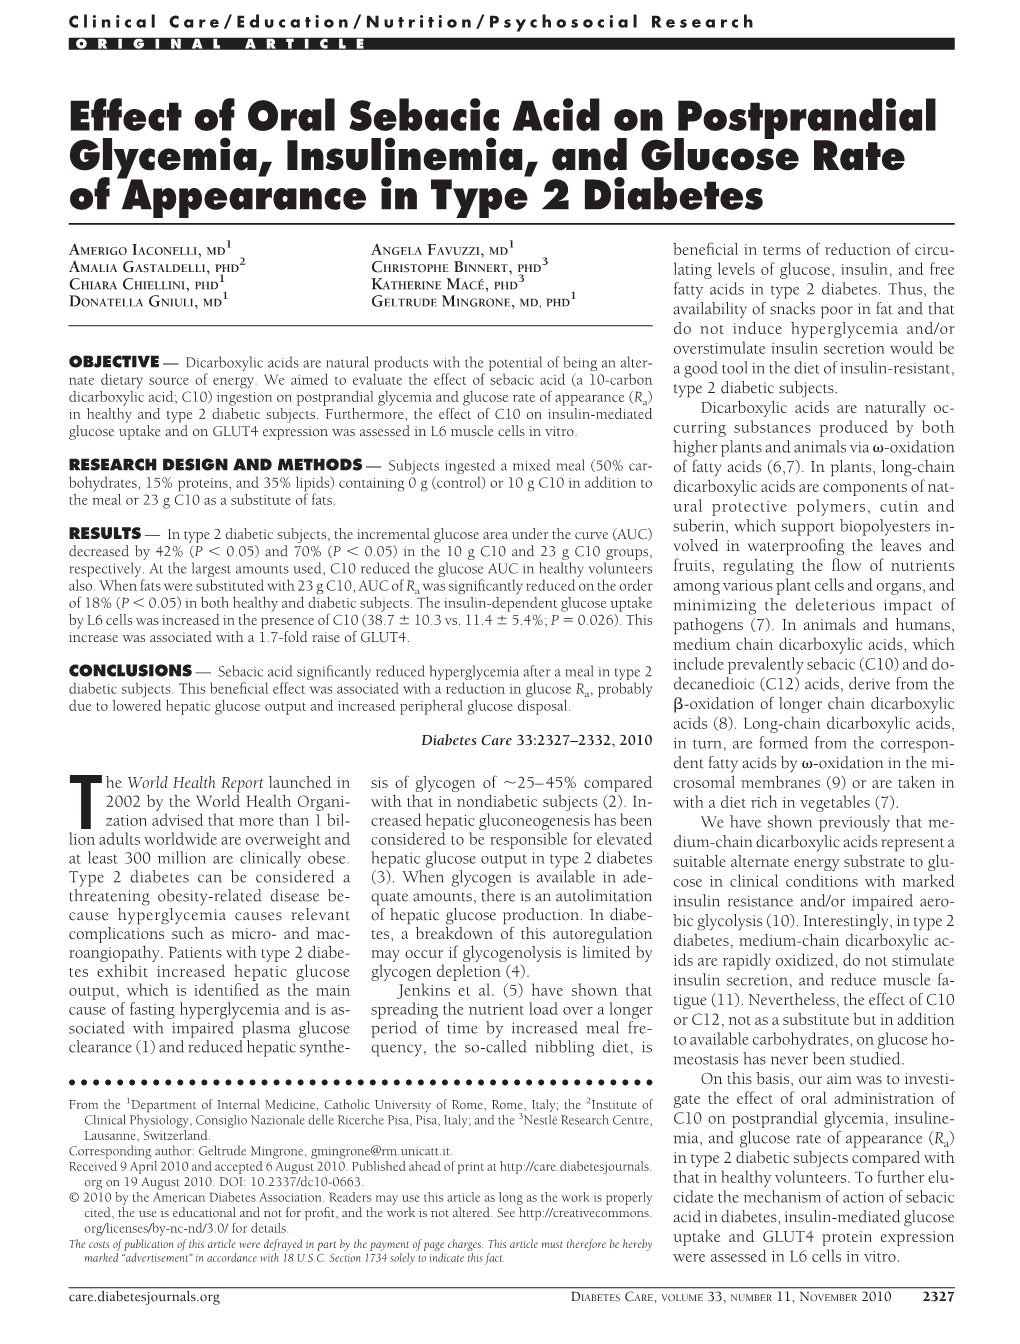 Effect of Oral Sebacic Acid on Postprandial Glycemia, Insulinemia, and Glucose Rate of Appearance in Type 2 Diabetes